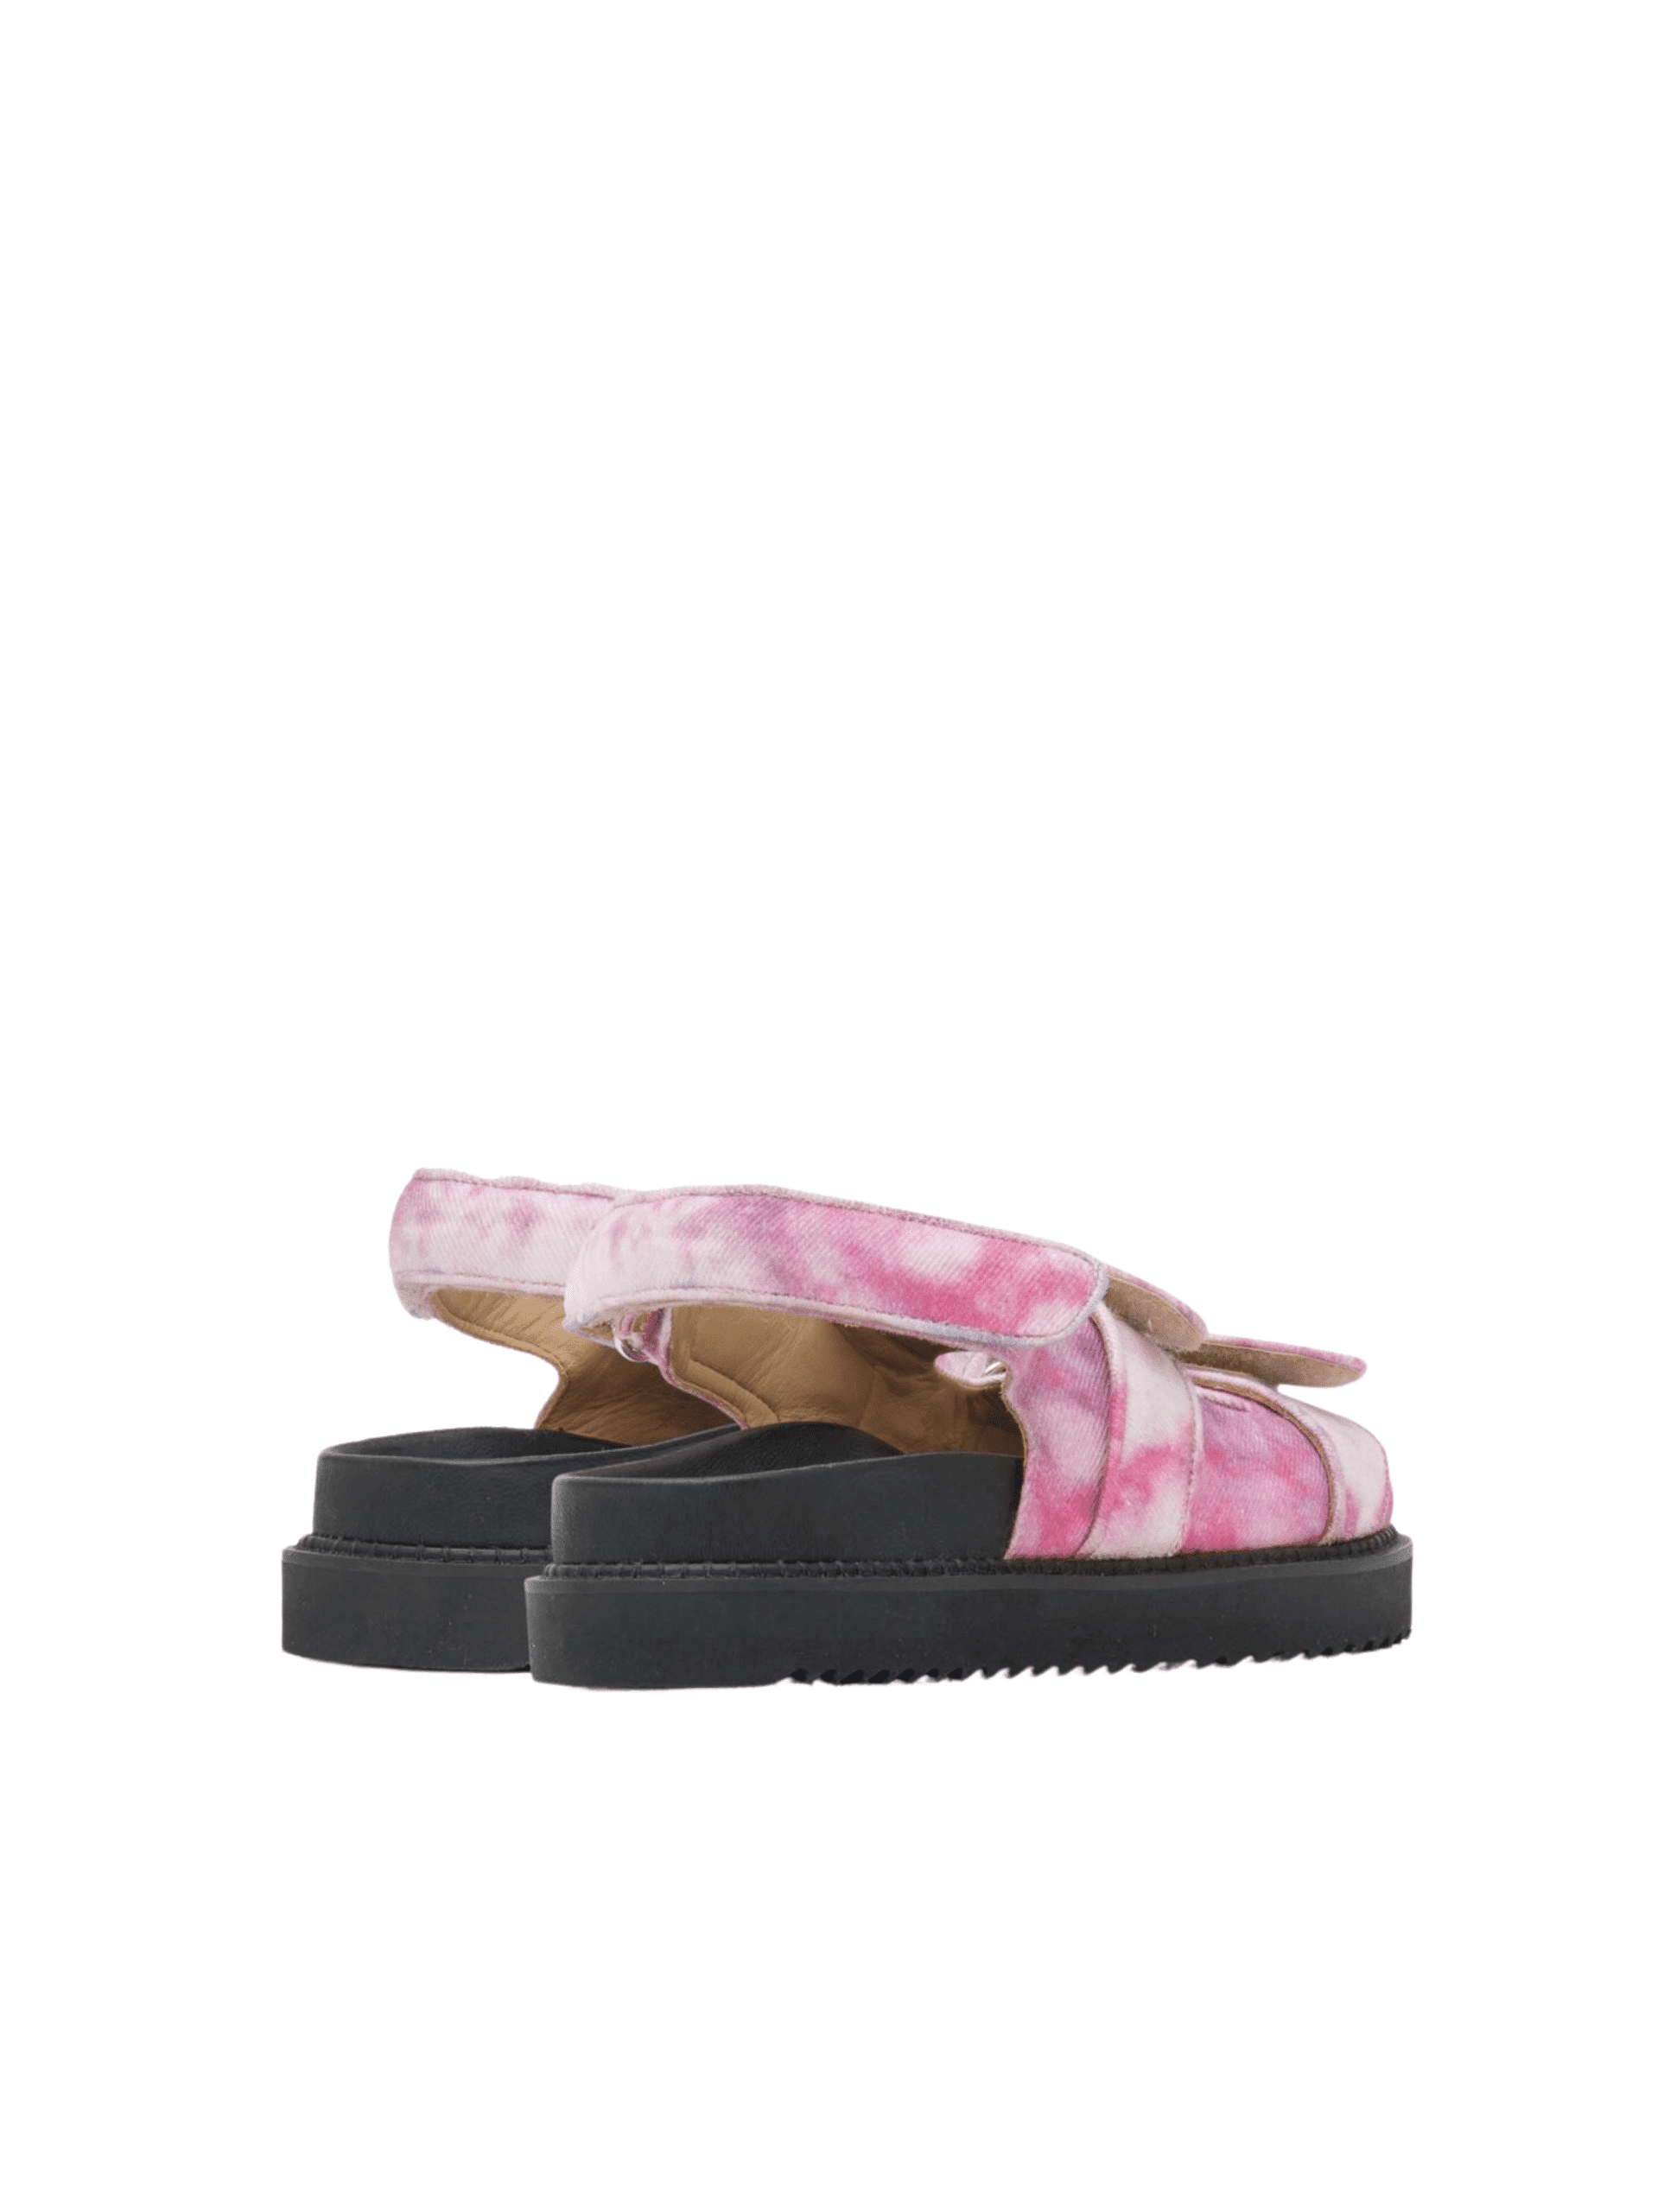 Madee Sandals / Mulberry Womens Isabel Marant 